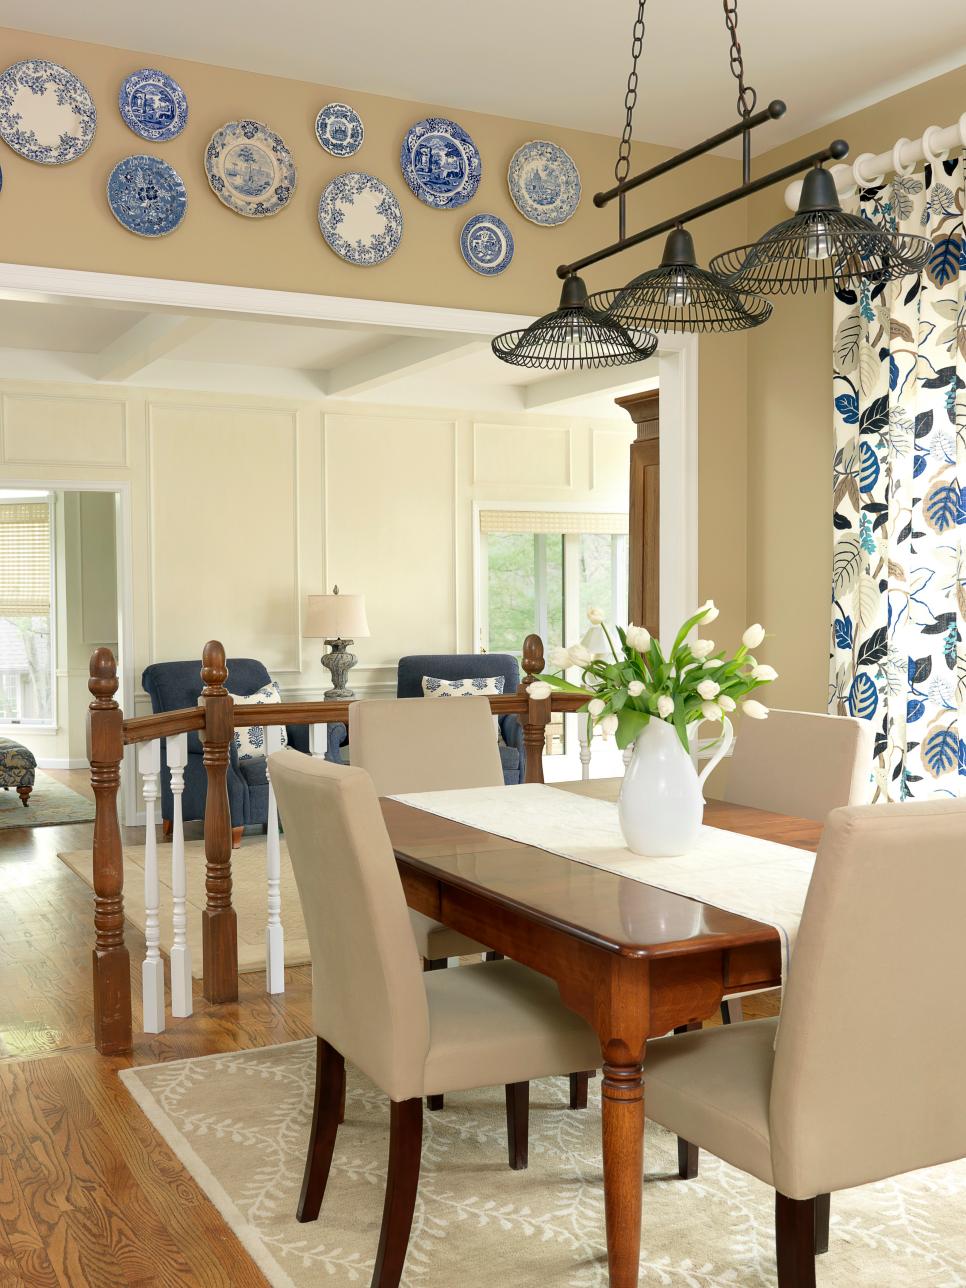 Traditional Breakfast Room With, Industrial Light Fixtures Dining Room